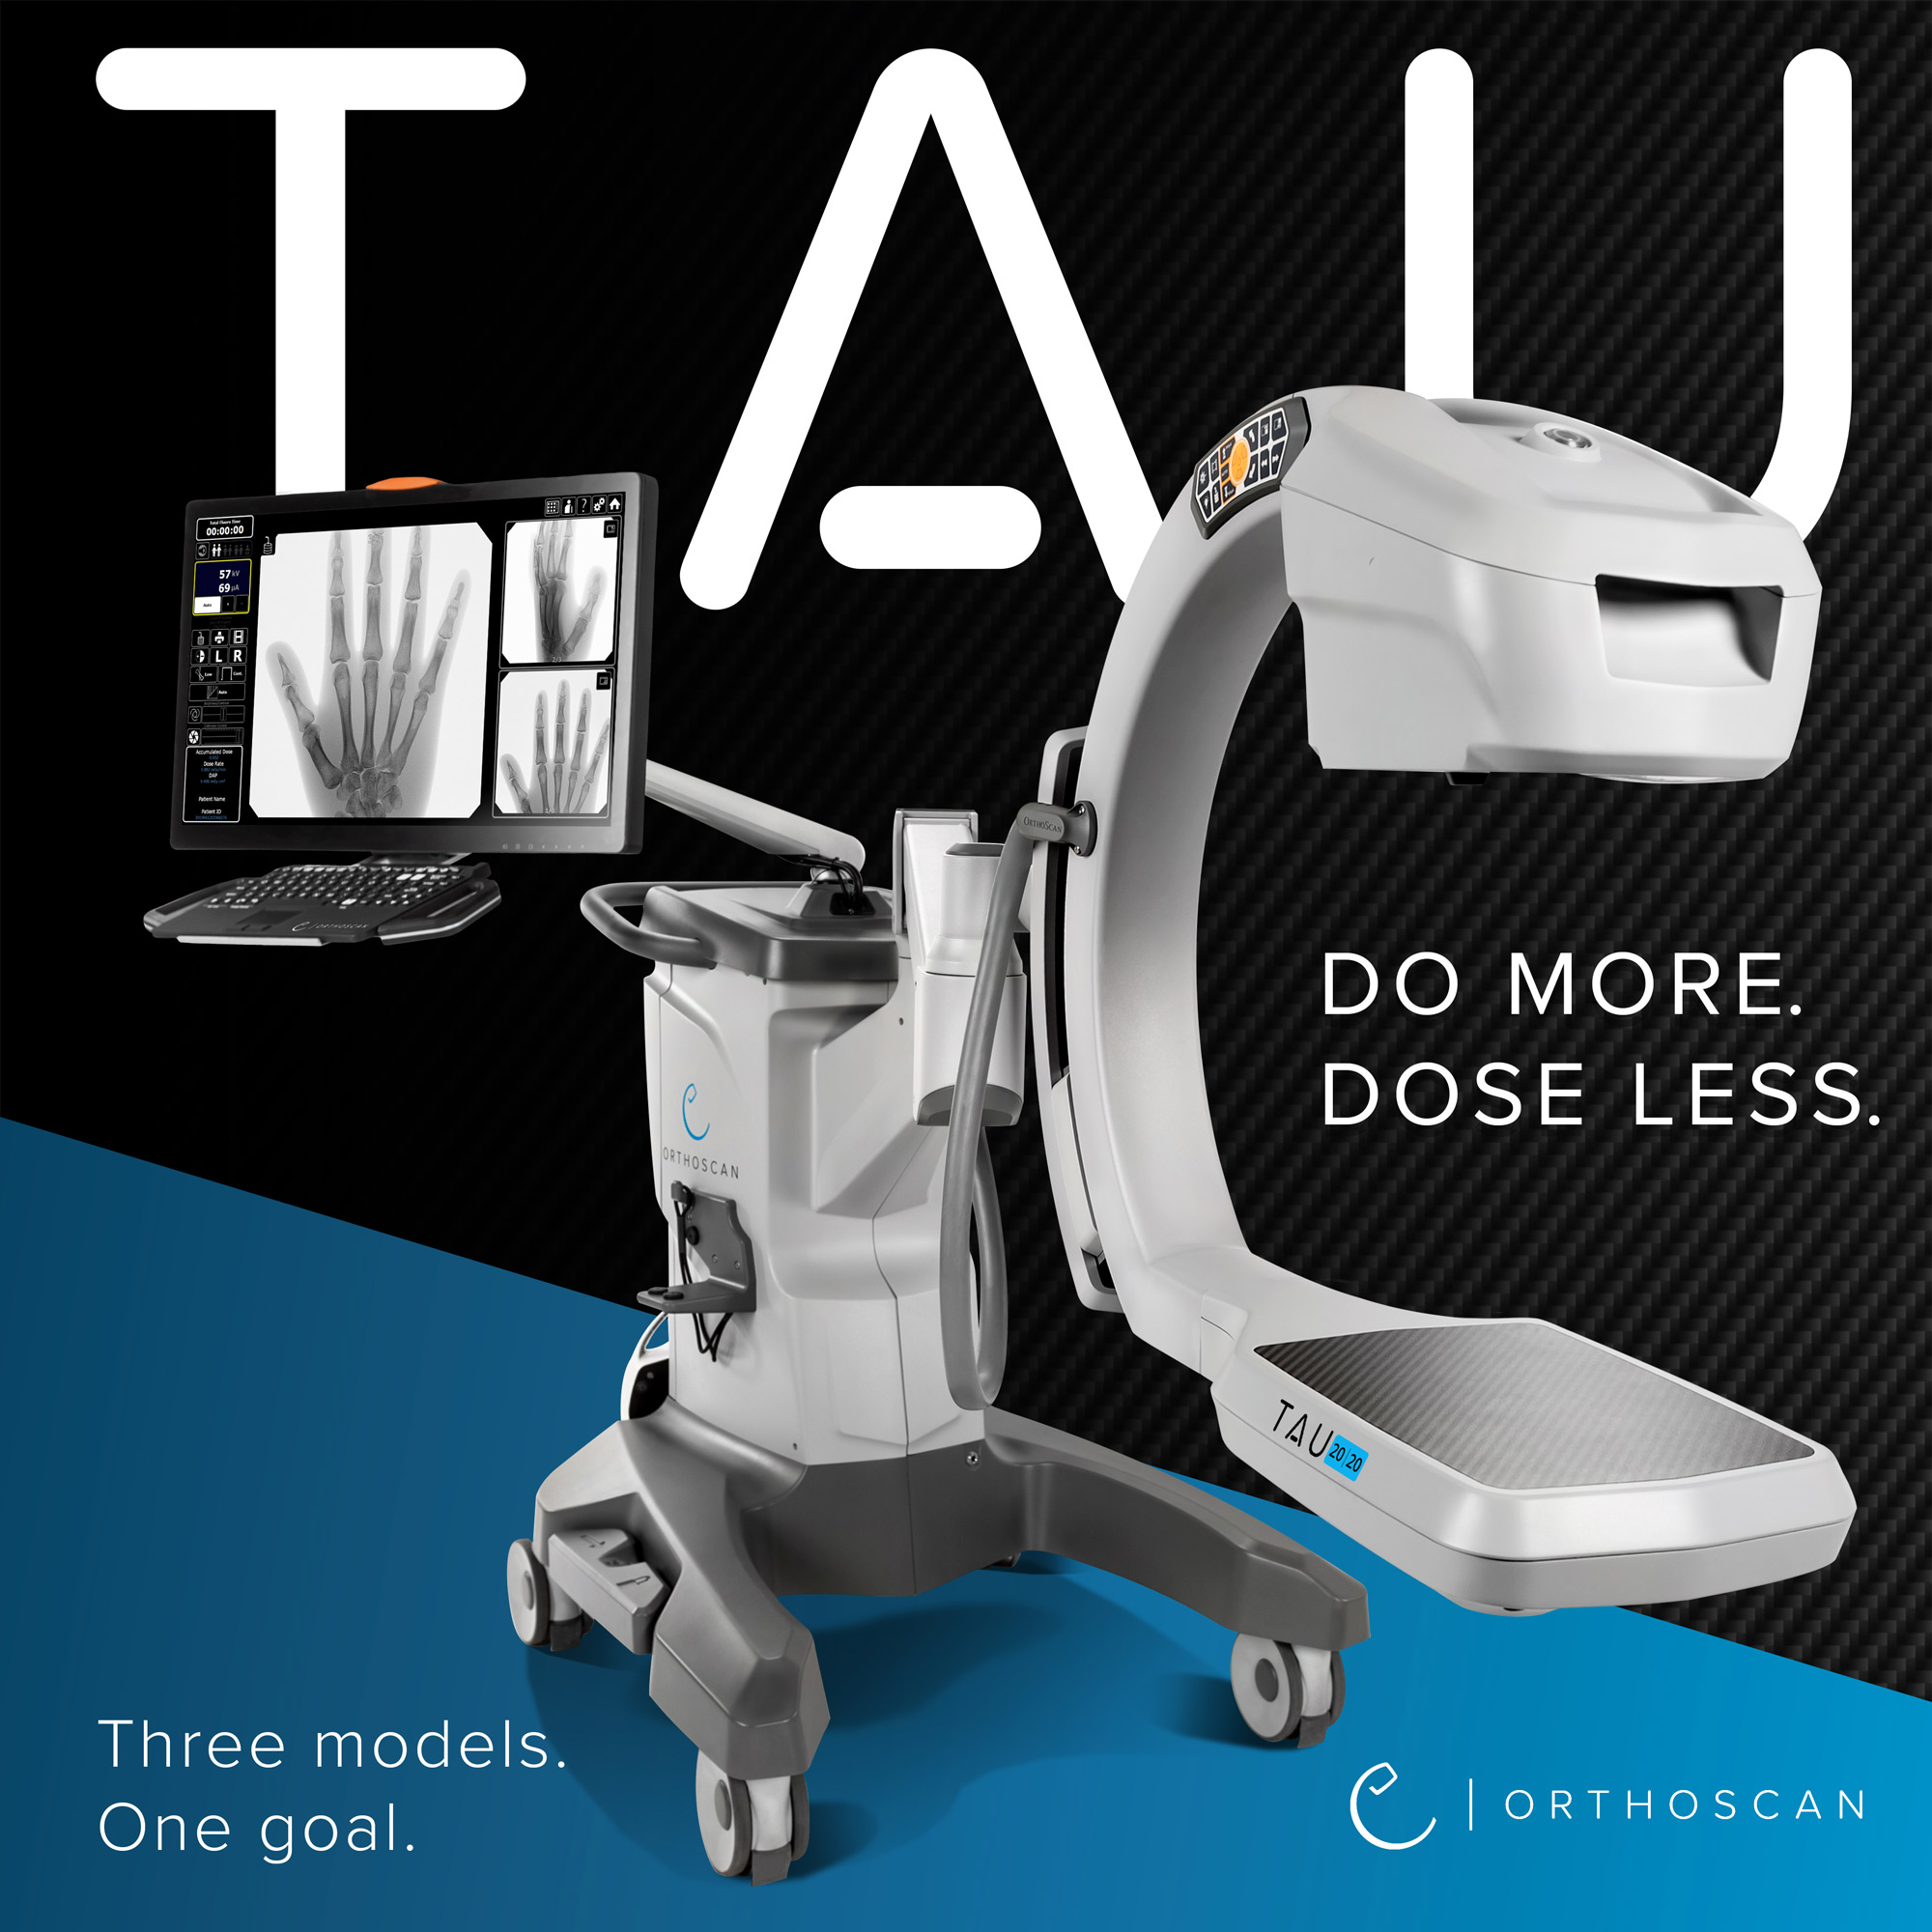 Introducing TAU, the newest member to the Orthoscan product line.